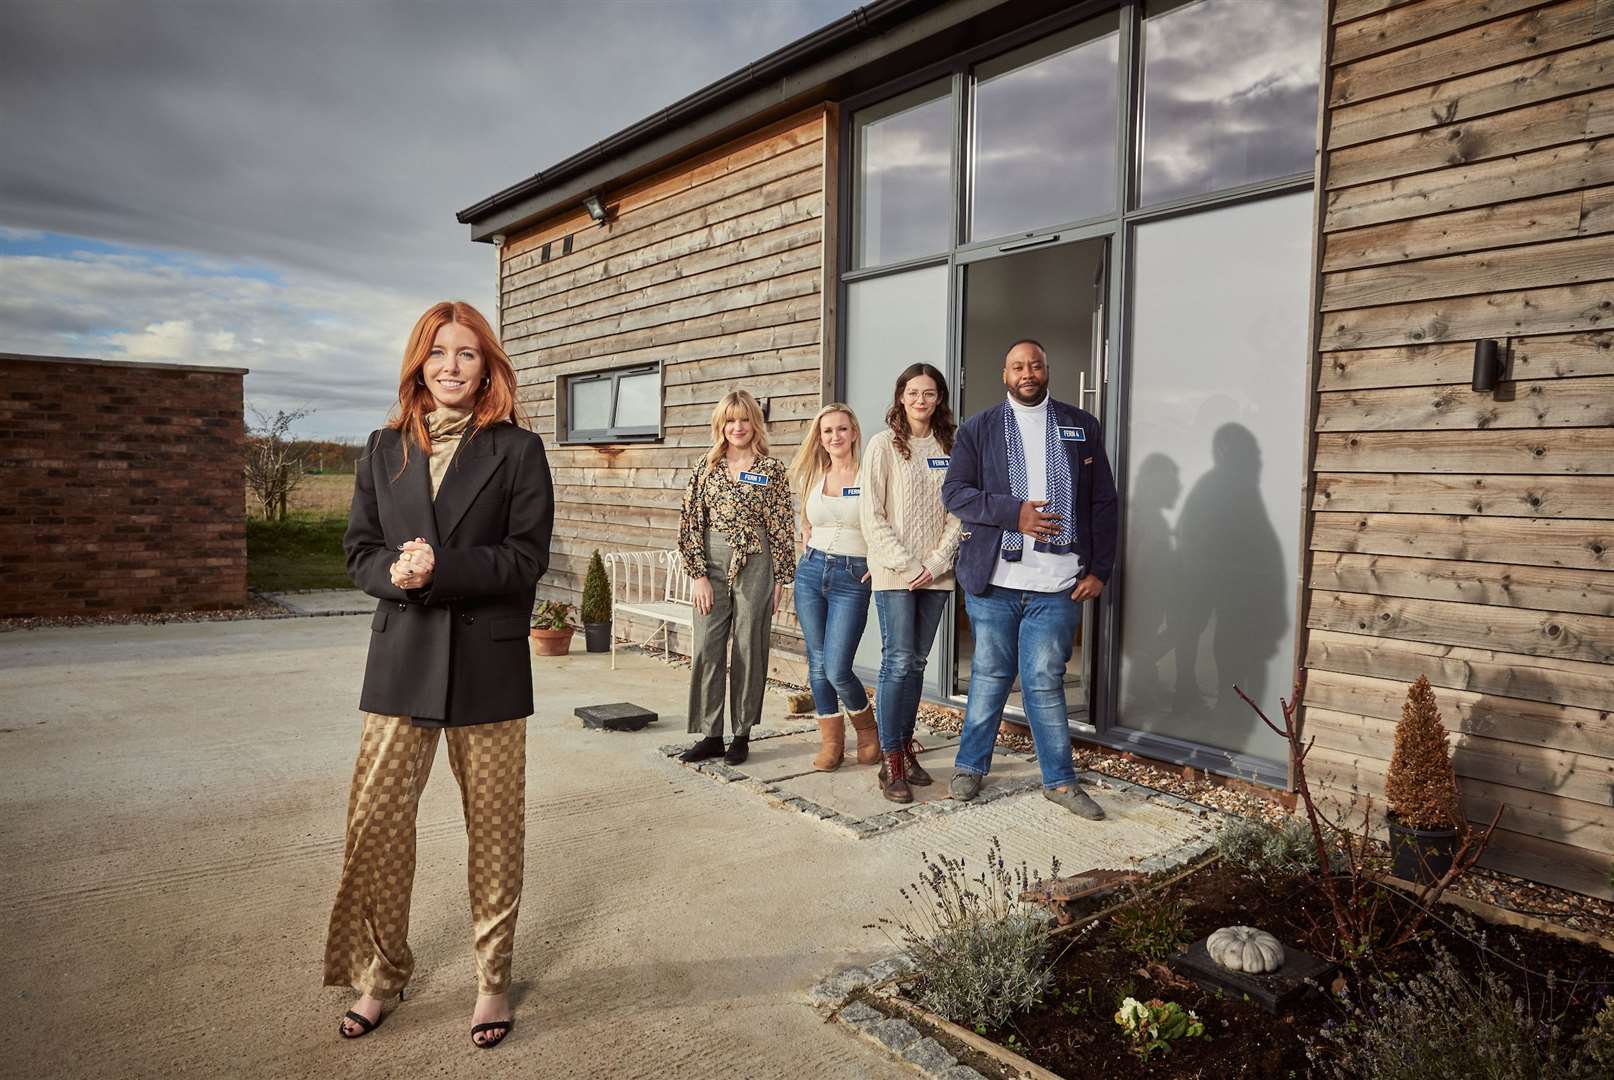 Stacey Dooley with the four 'Ferns' in new show This Is My House. Copyright: BBC/Expectation Entertainment. Photographer: Tom Dymond